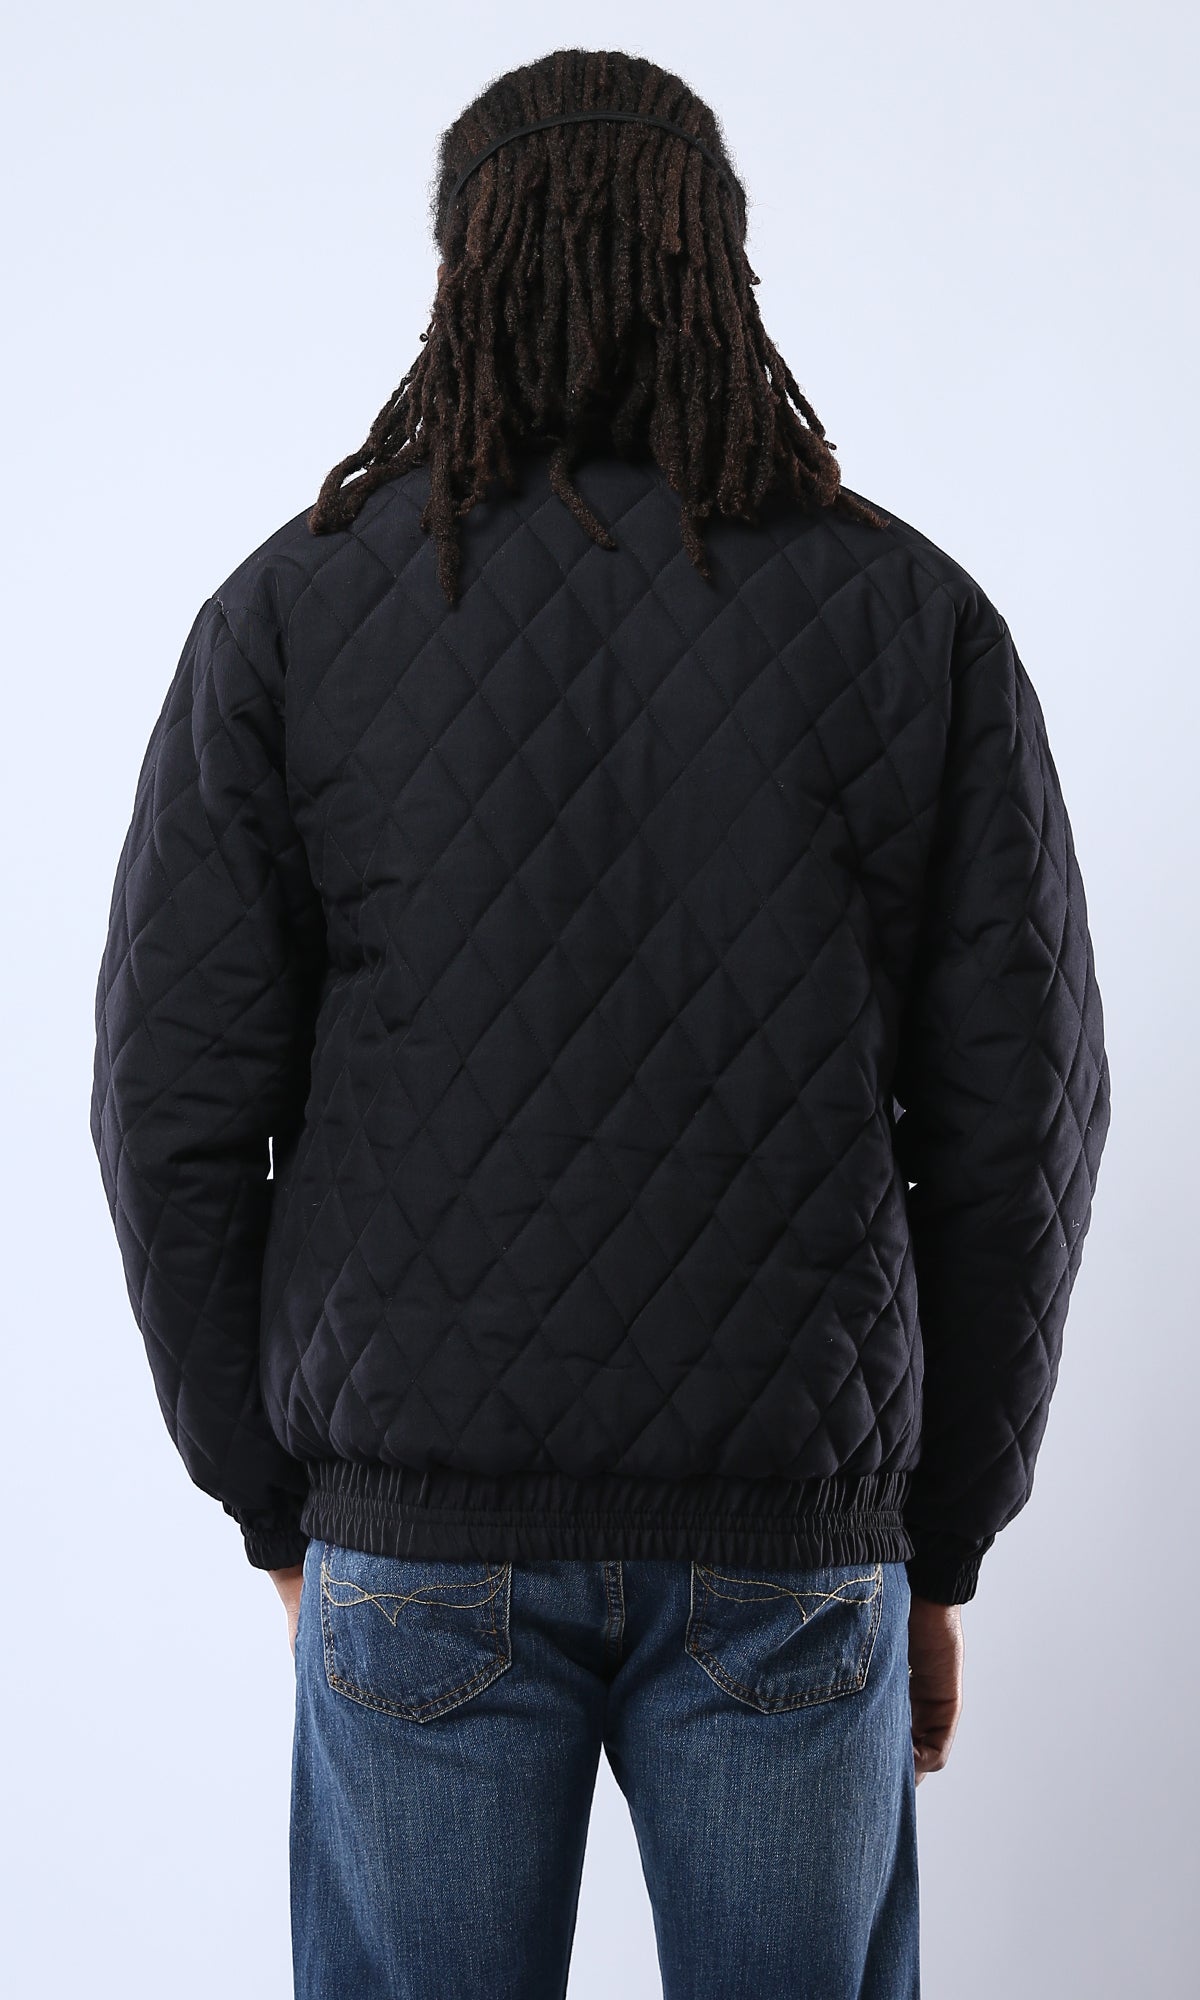 O175349 Band Neck Zipped Black Quilted Jacket